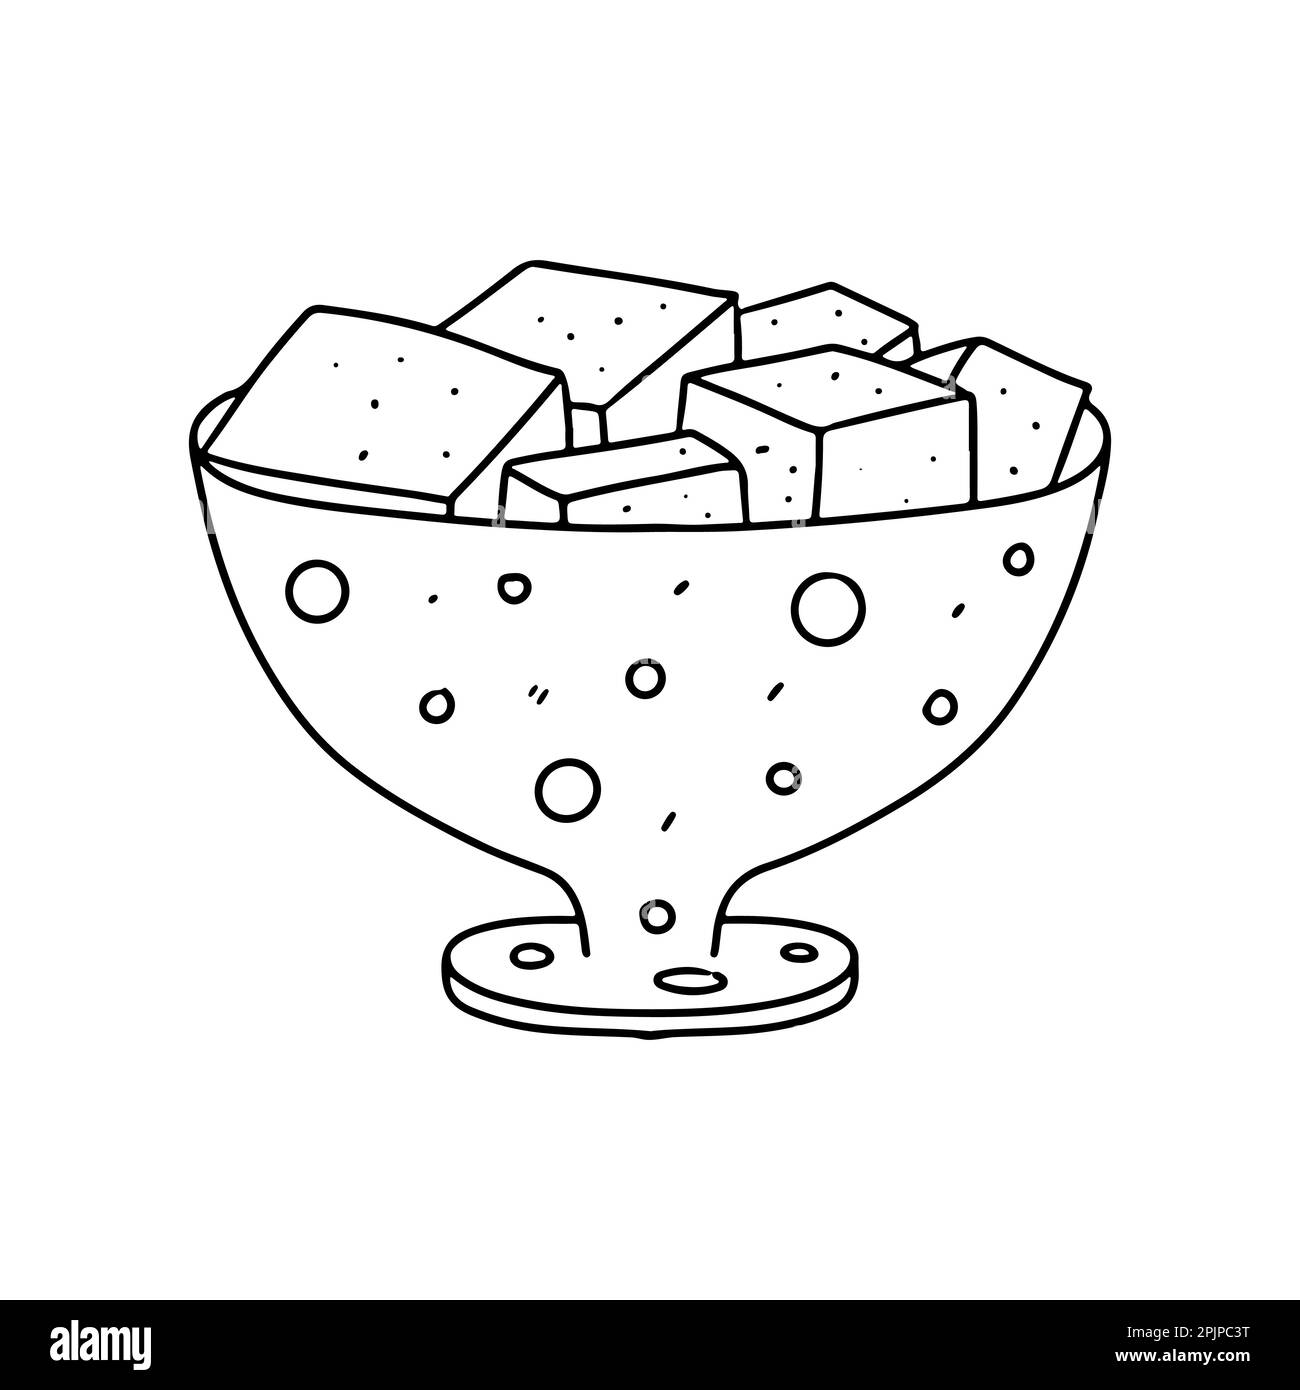 Sugar cubesr for cafe in hand drawn doodle style. Vector illustration isolated on white background. Stock Vector